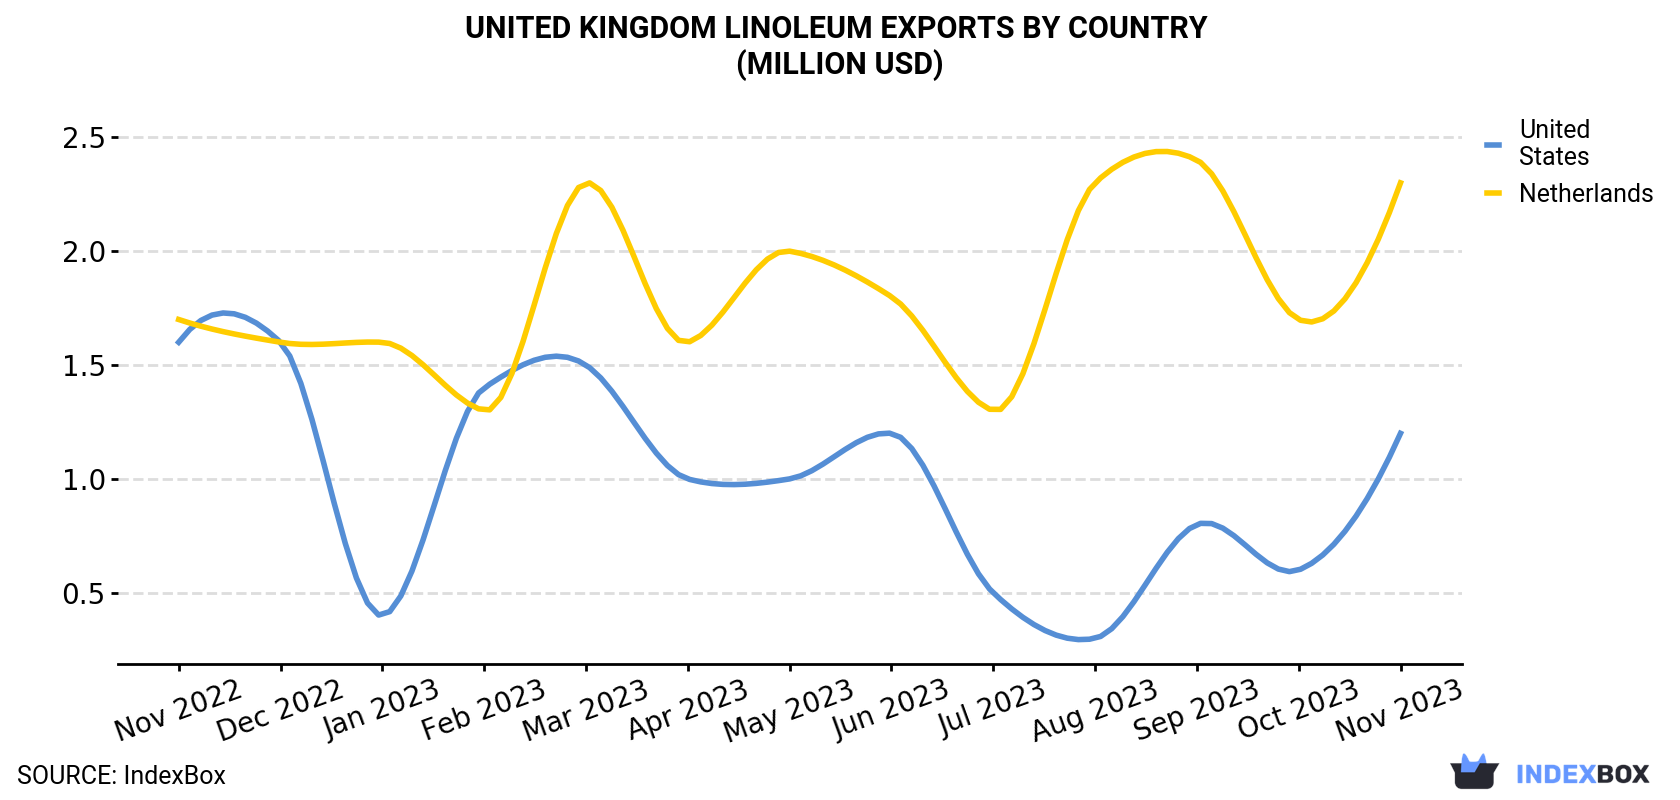 United Kingdom Linoleum Exports By Country (Million USD)